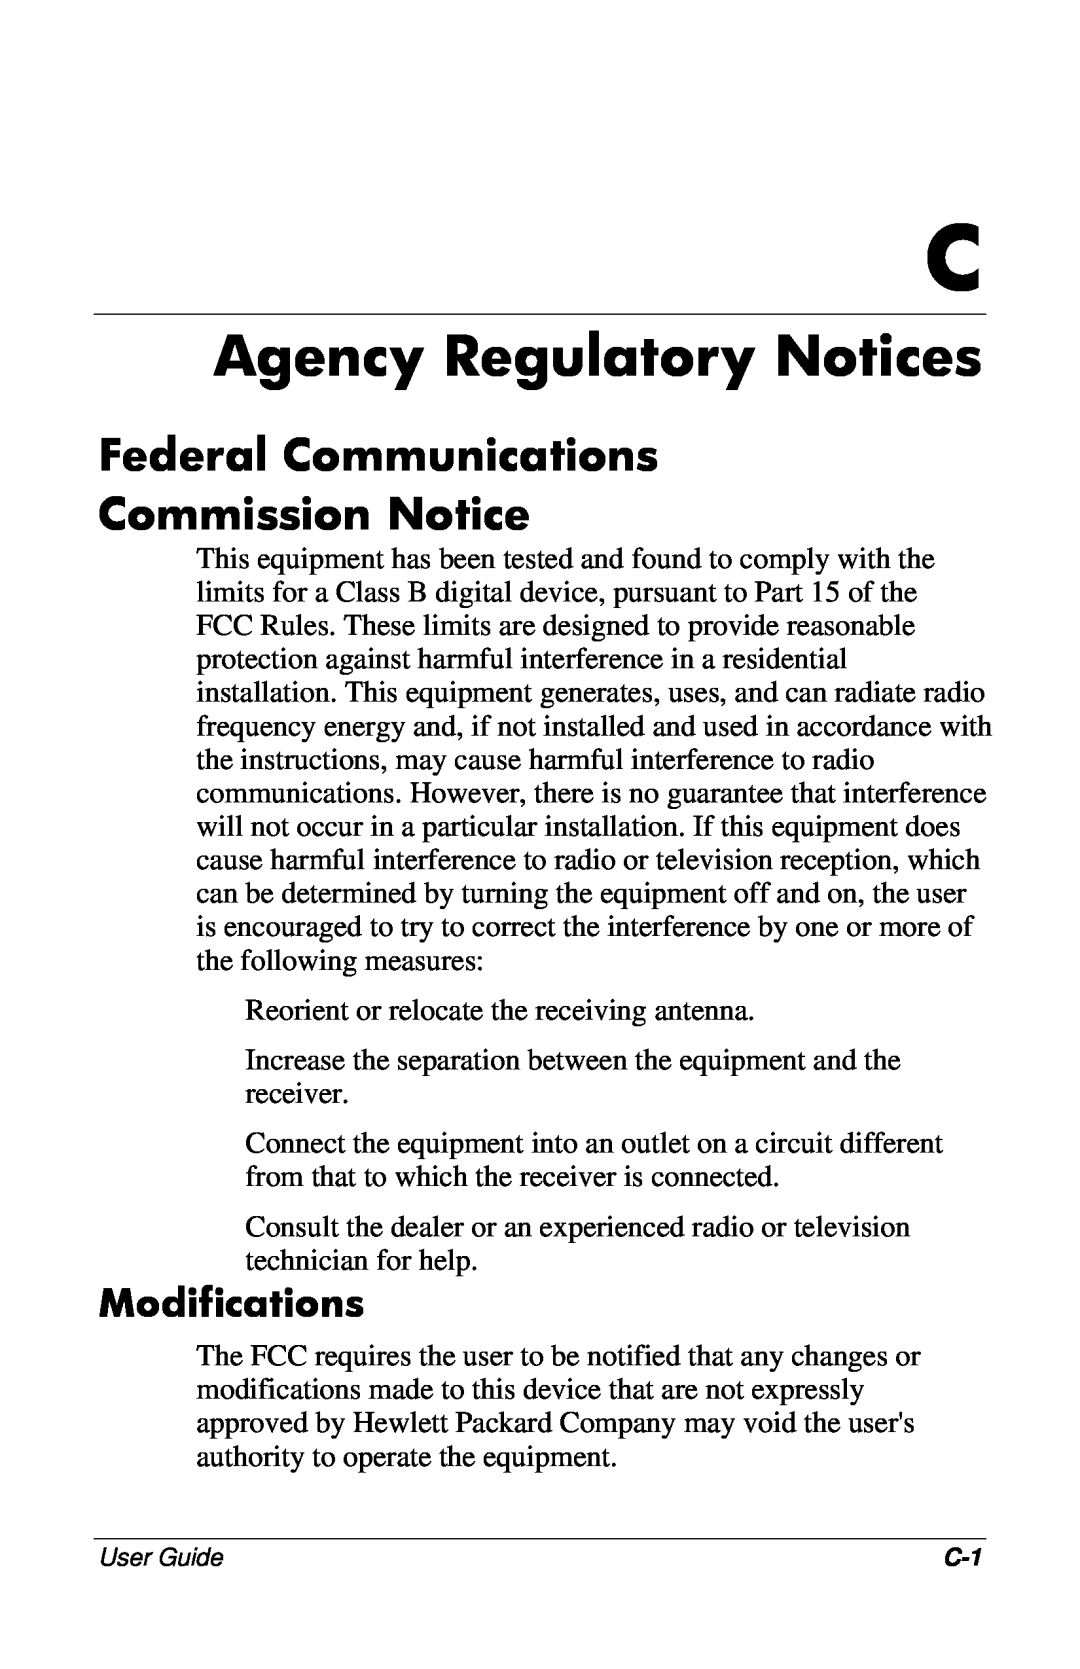 HP mx704, 7500, CRT, 9500, 7550, 5500 manual Agency Regulatory Notices, Federal Communications Commission Notice, Modifications 